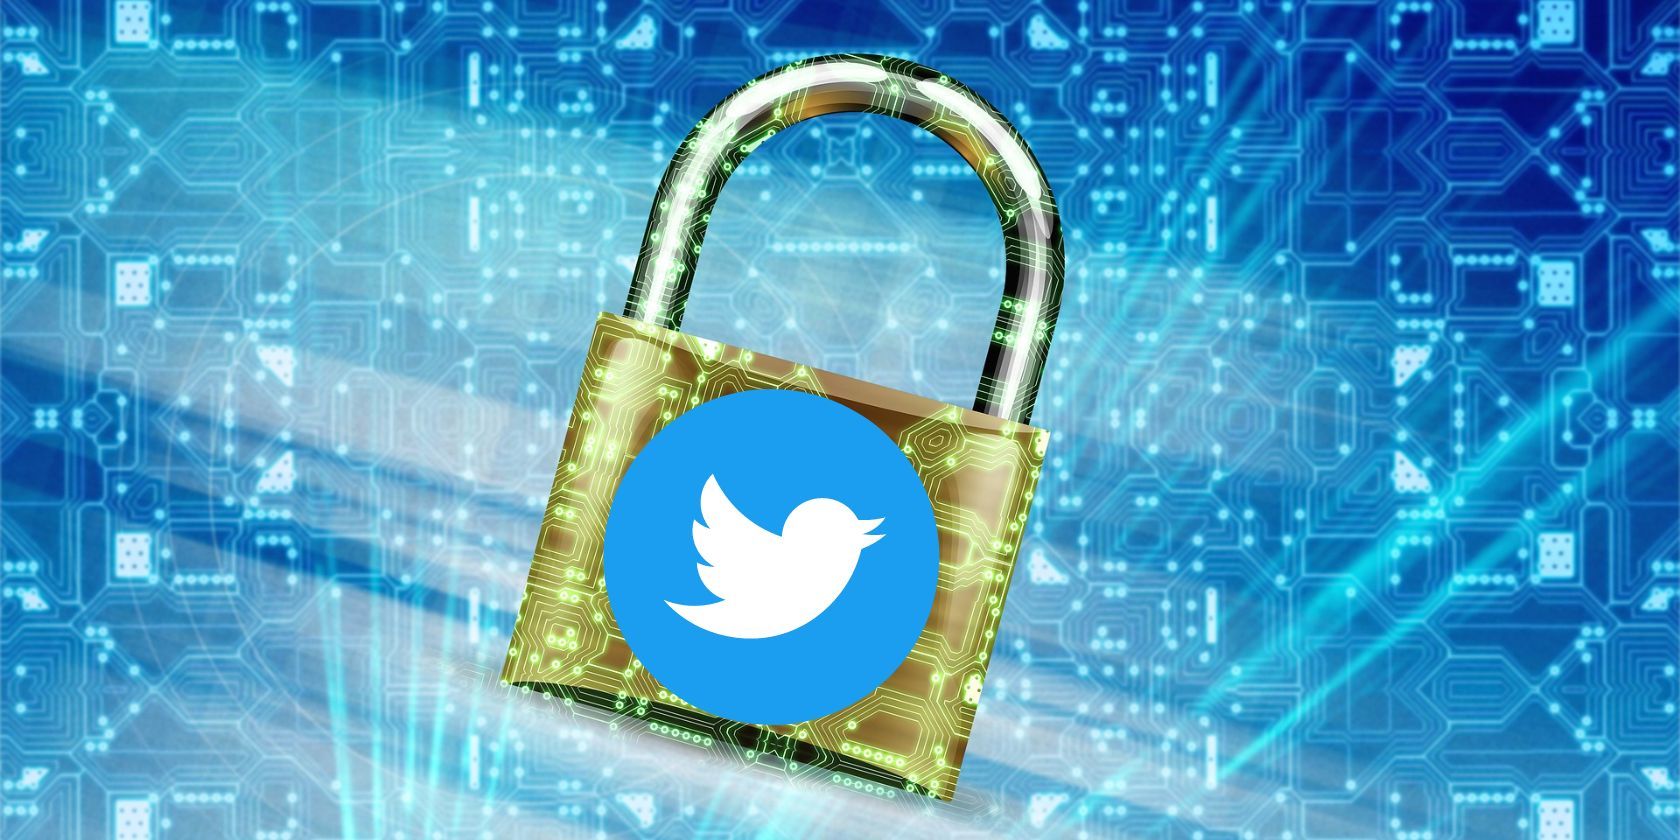 How to Protect Yourself After the Latest Alleged Twitter Data Breach